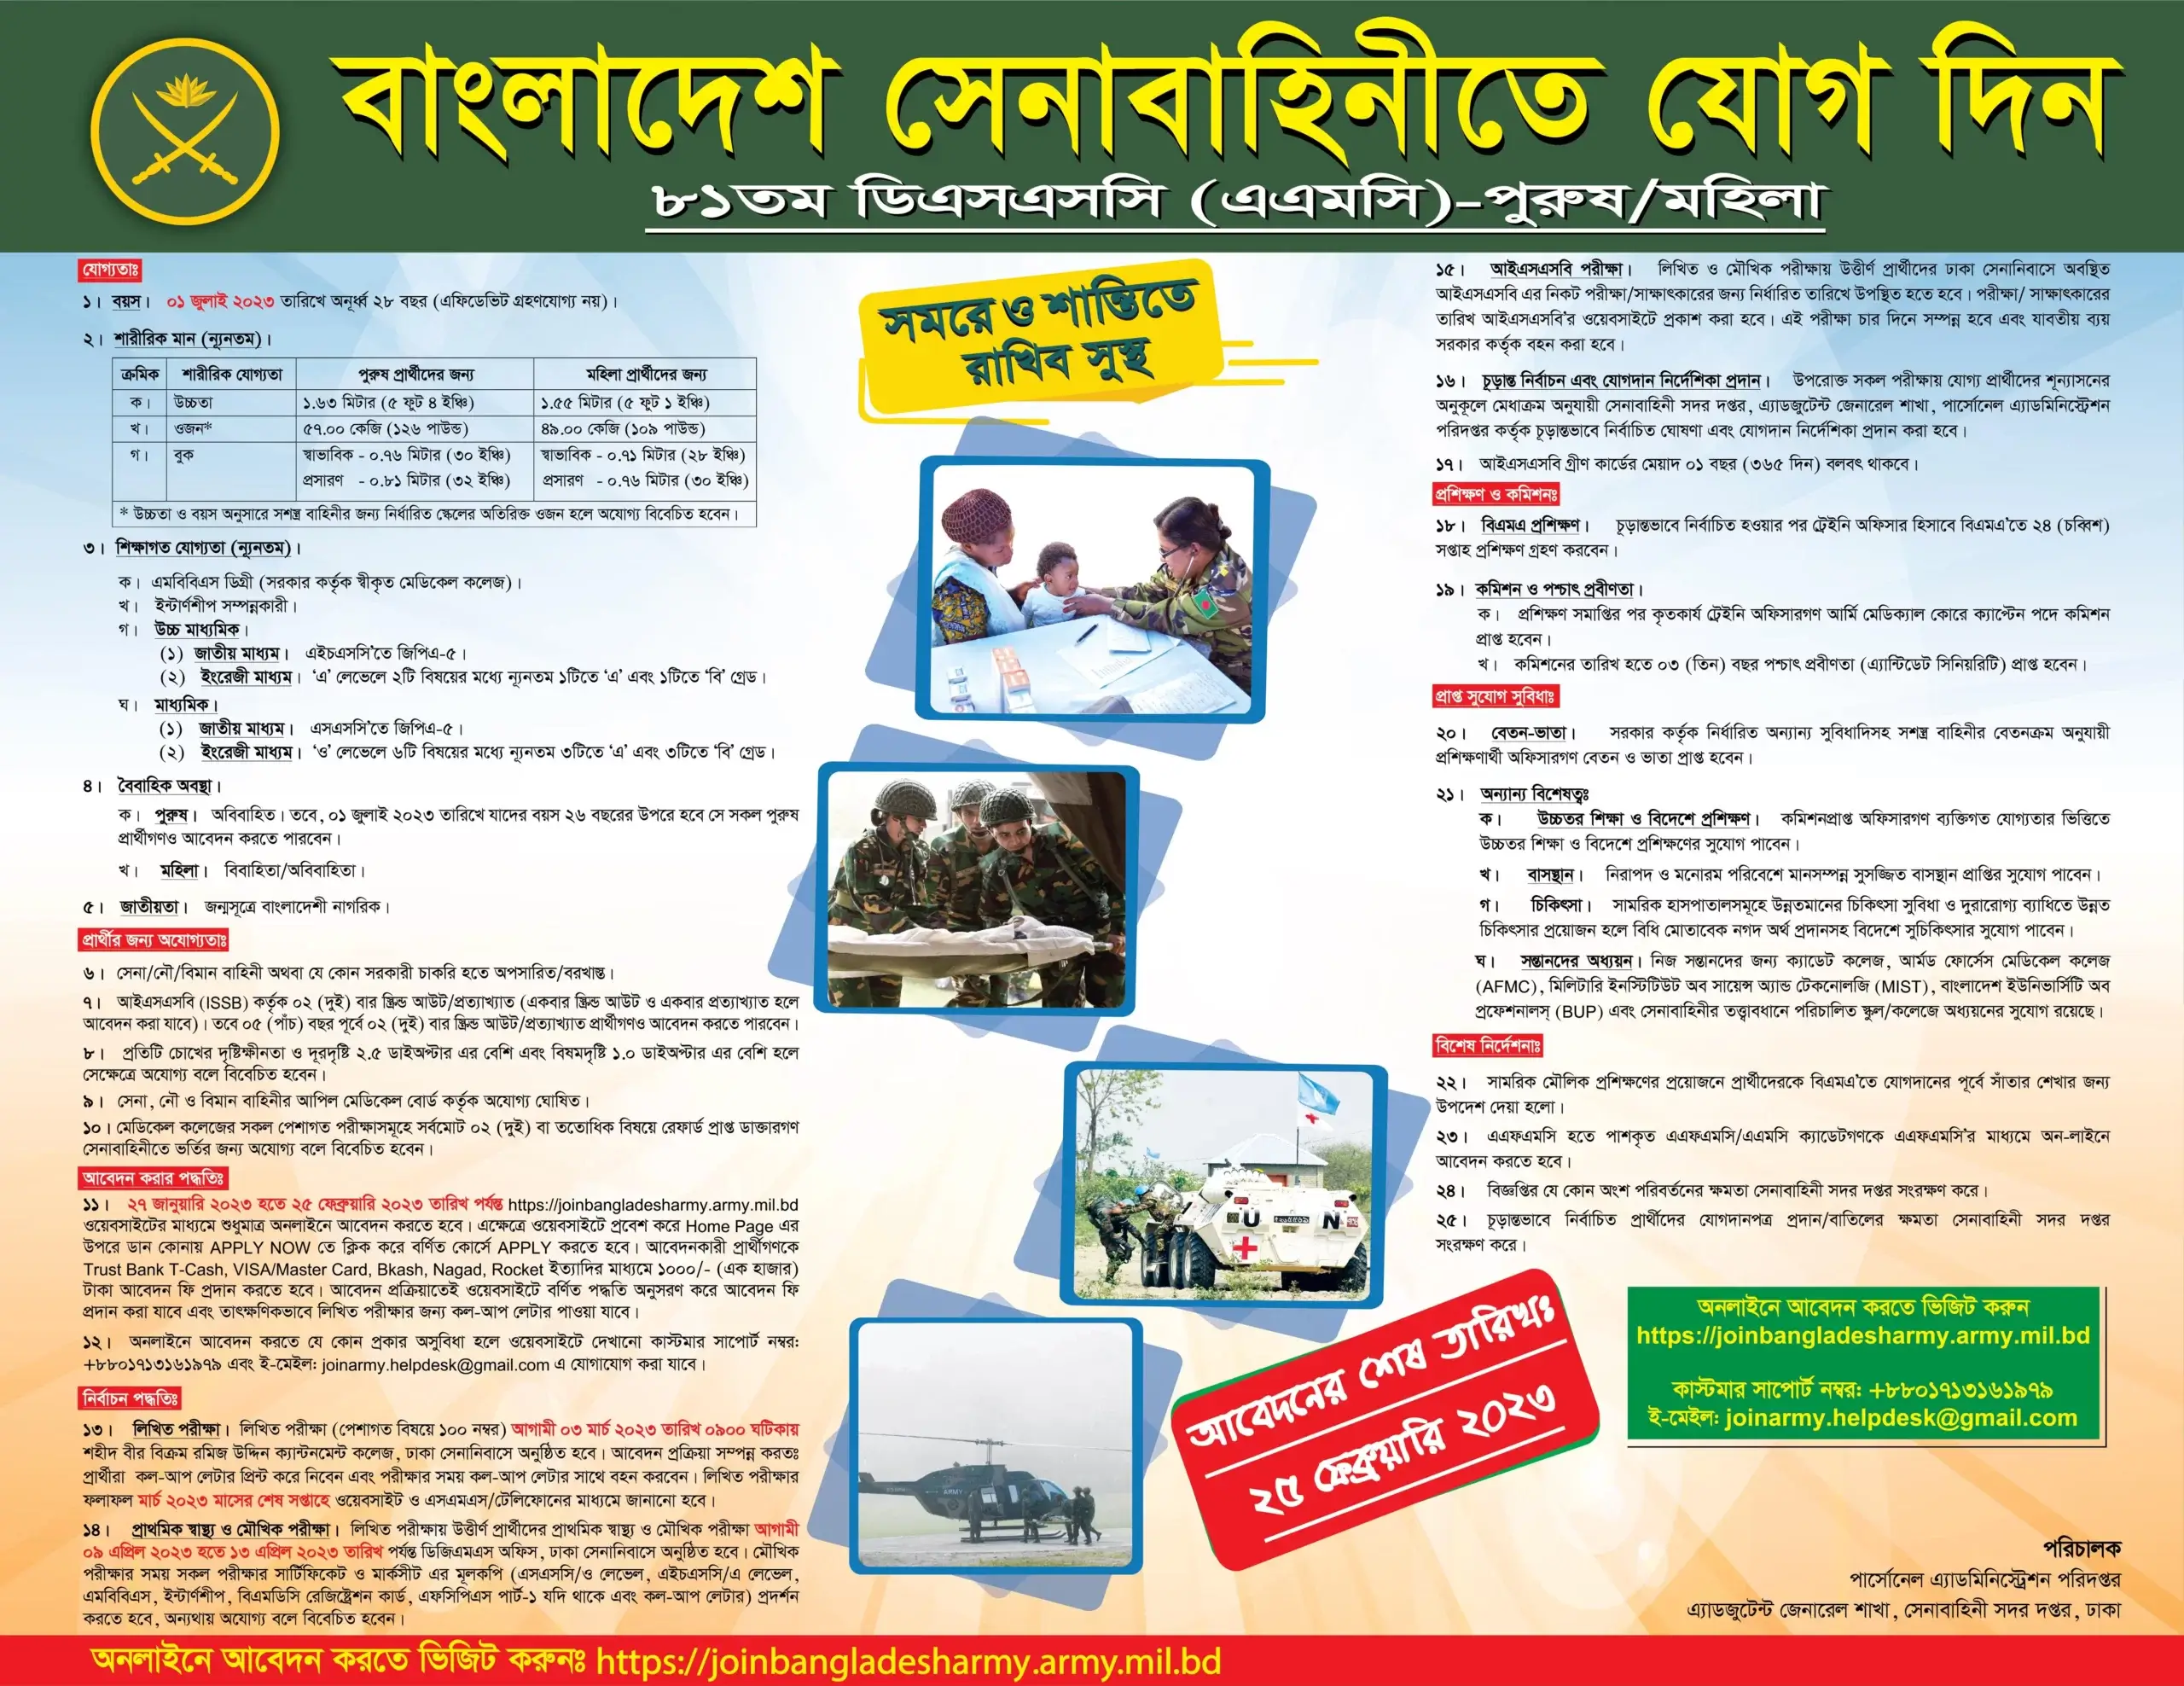 Bangladesh Army Officer Recruitment Circular published on 26 January 2023